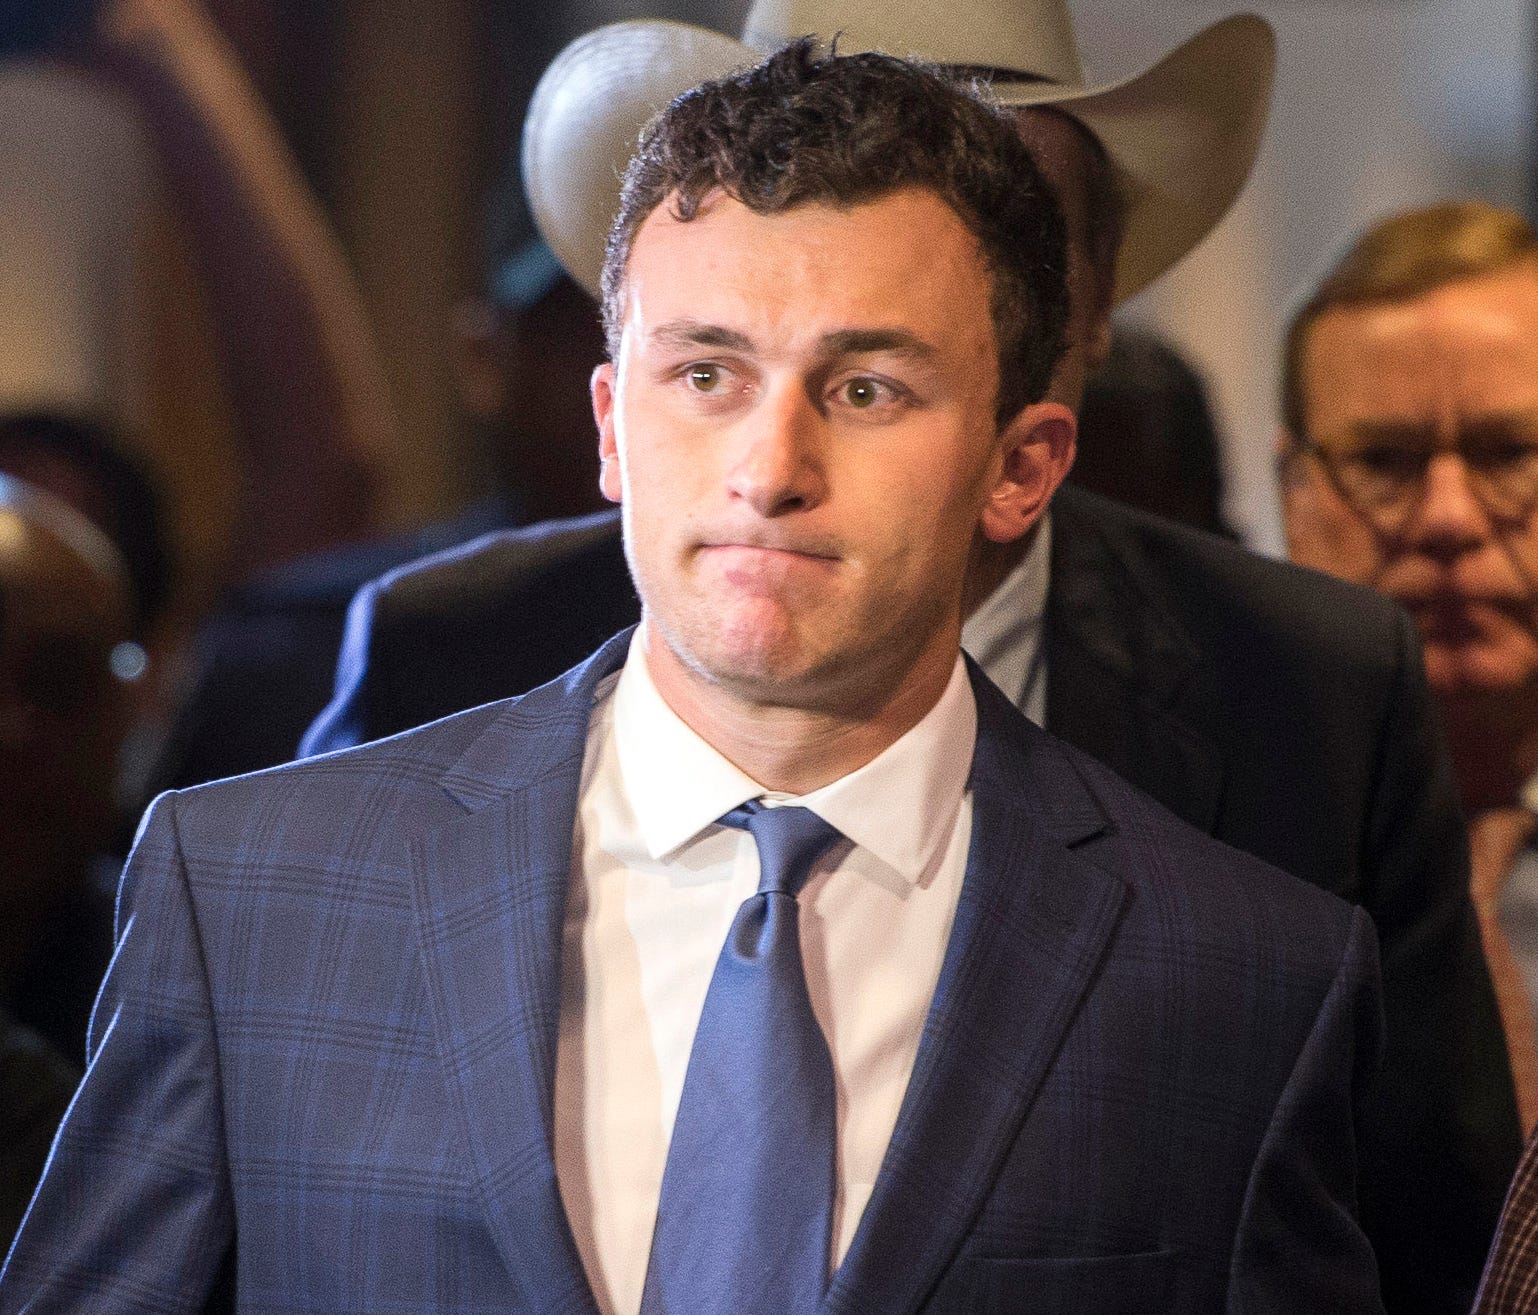 Johnny Manziel makes his first appearance in court for his misdemeanor assault charge at the Frank Crowley Courts Building.